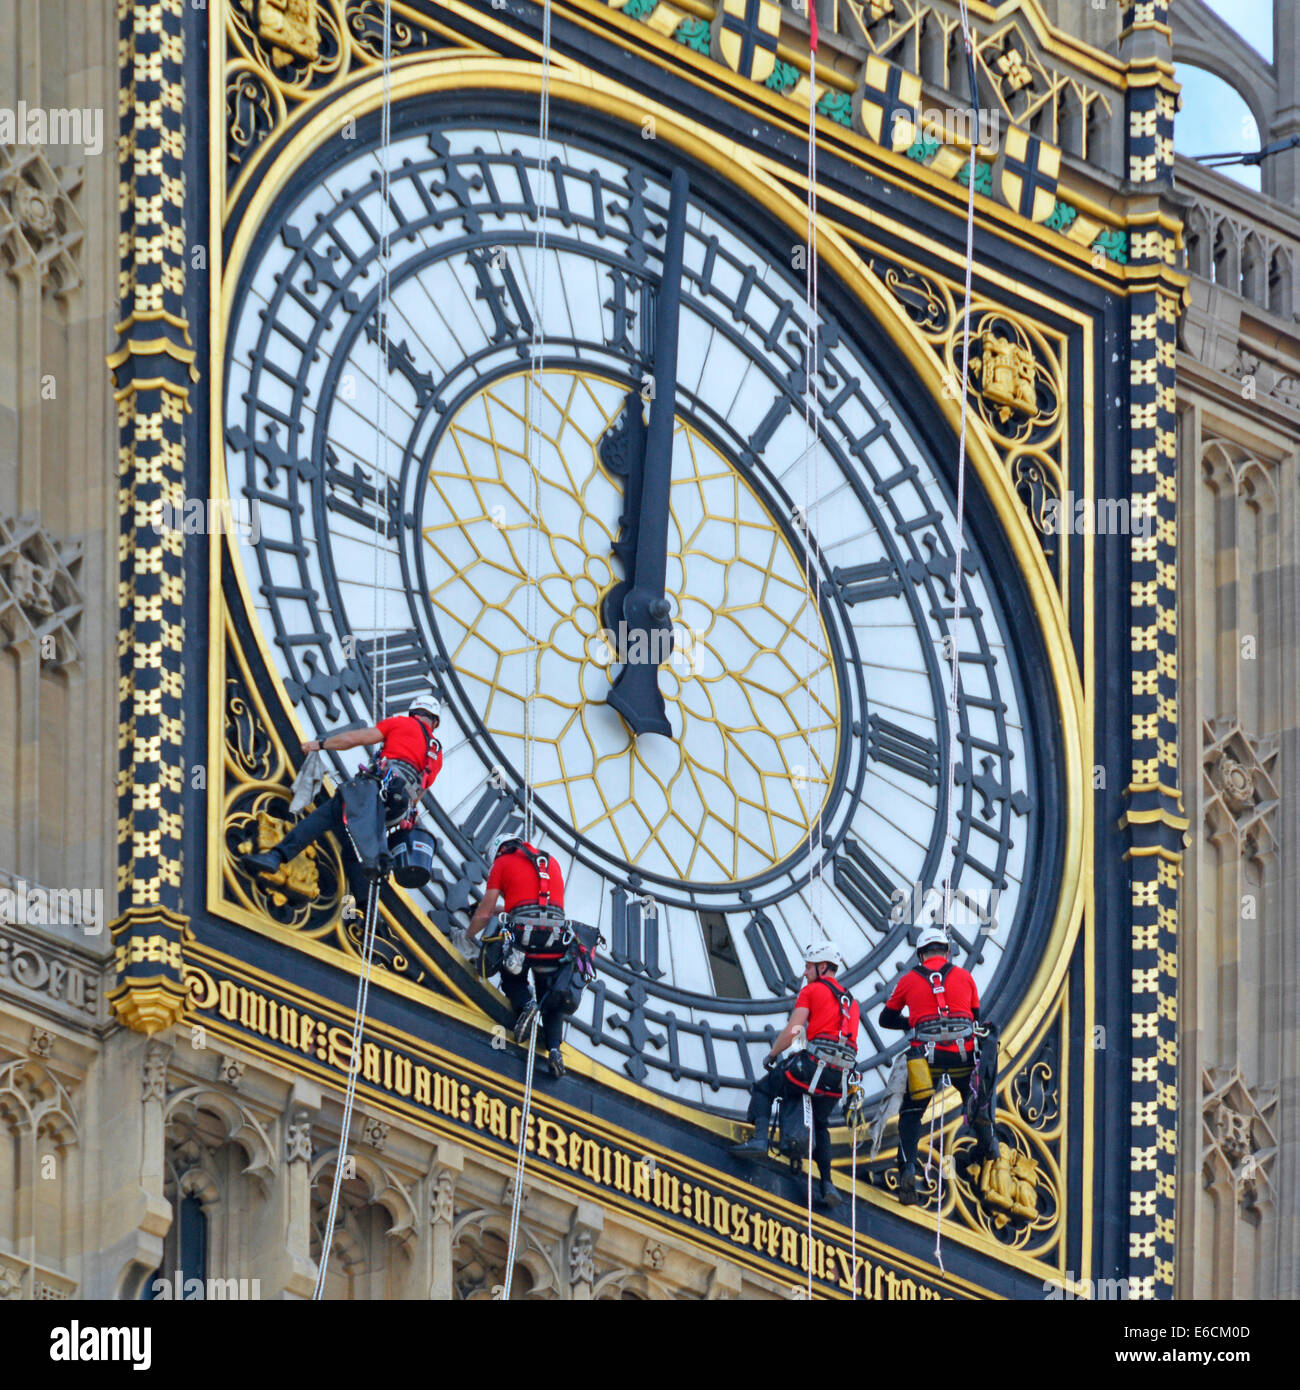 Group of cleaners abseiling Big Ben to clean the iconic clock face with hands set to wrong time of 12 noon or midnight Westminster London England UK Stock Photo